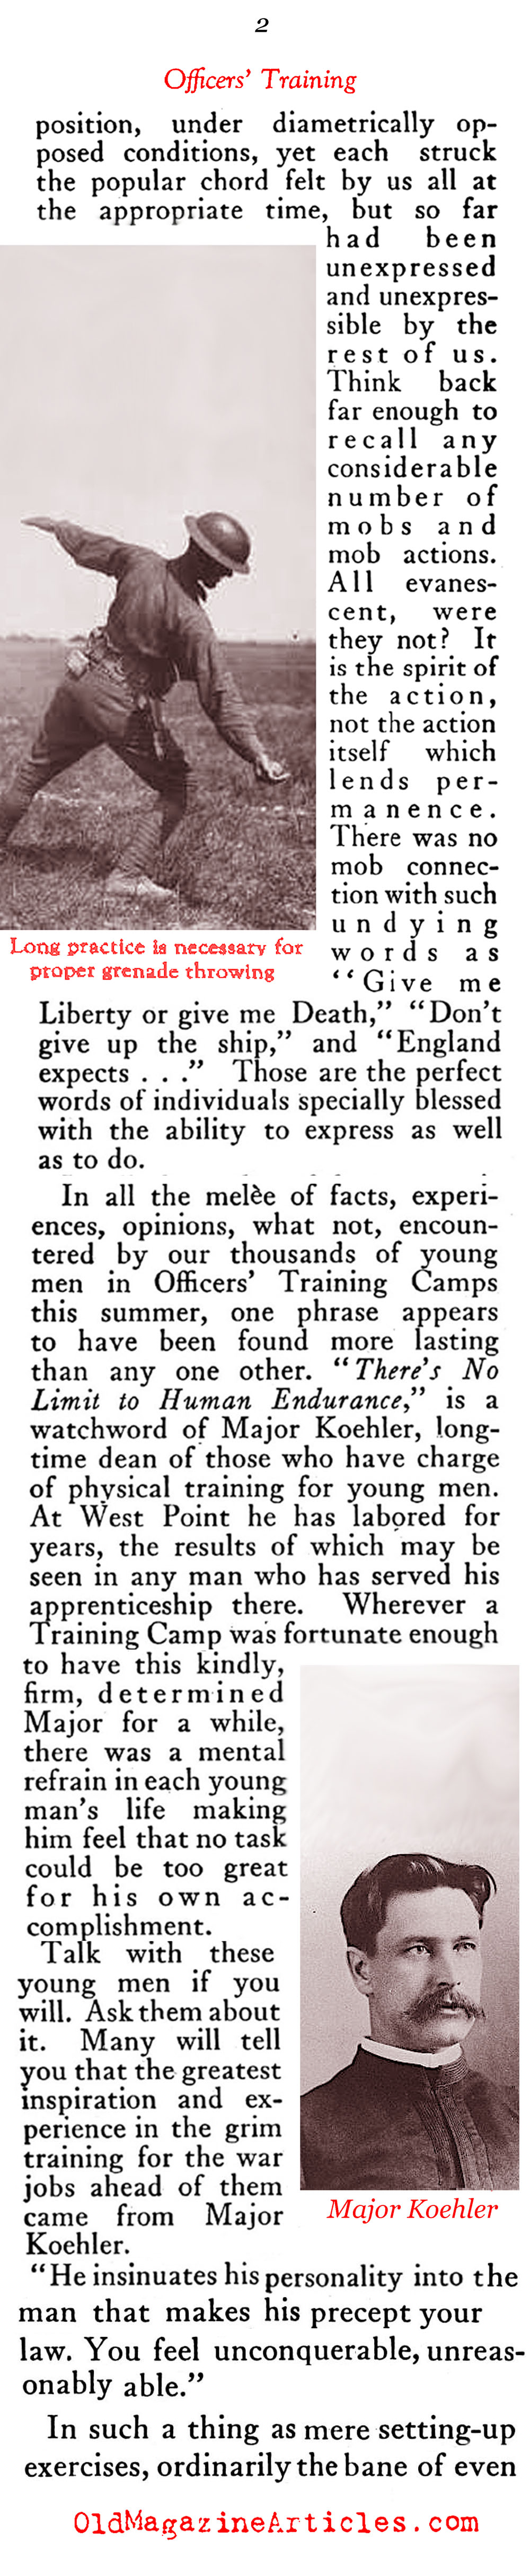 The Power of Positive Thought in Military Training (Outing Magazine, 1918)